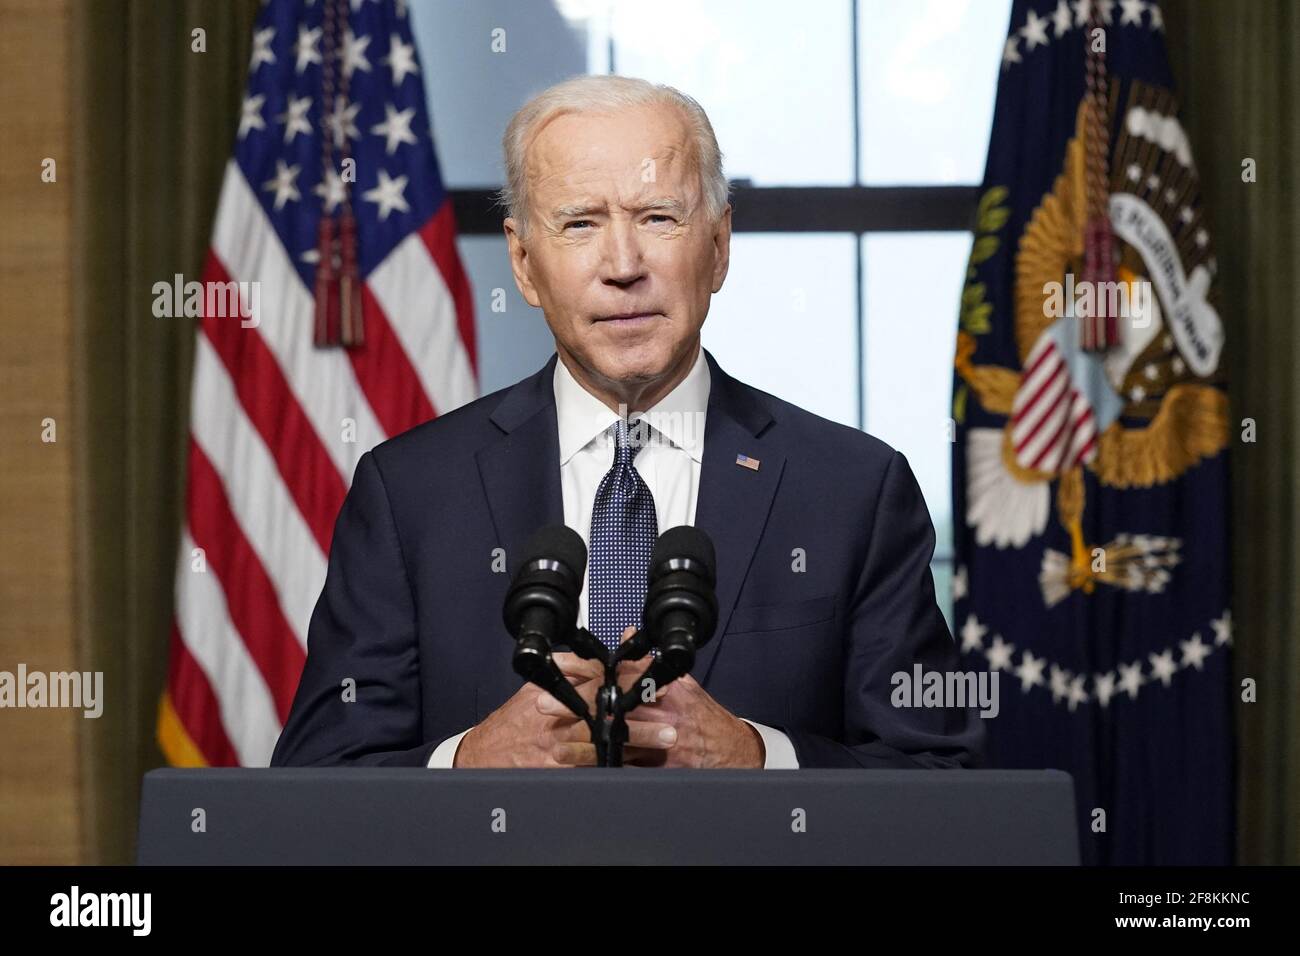 Washington, United States. 14th Apr, 2021. President Joe Biden speaks from the Treaty Room in the White House on Wednesday, April 14, 2021 about the withdrawal of the remainder of U.S. troops from Afghanistan. Pool Photo by Andrew Harnik/UPI Credit: UPI/Alamy Live News Stock Photo